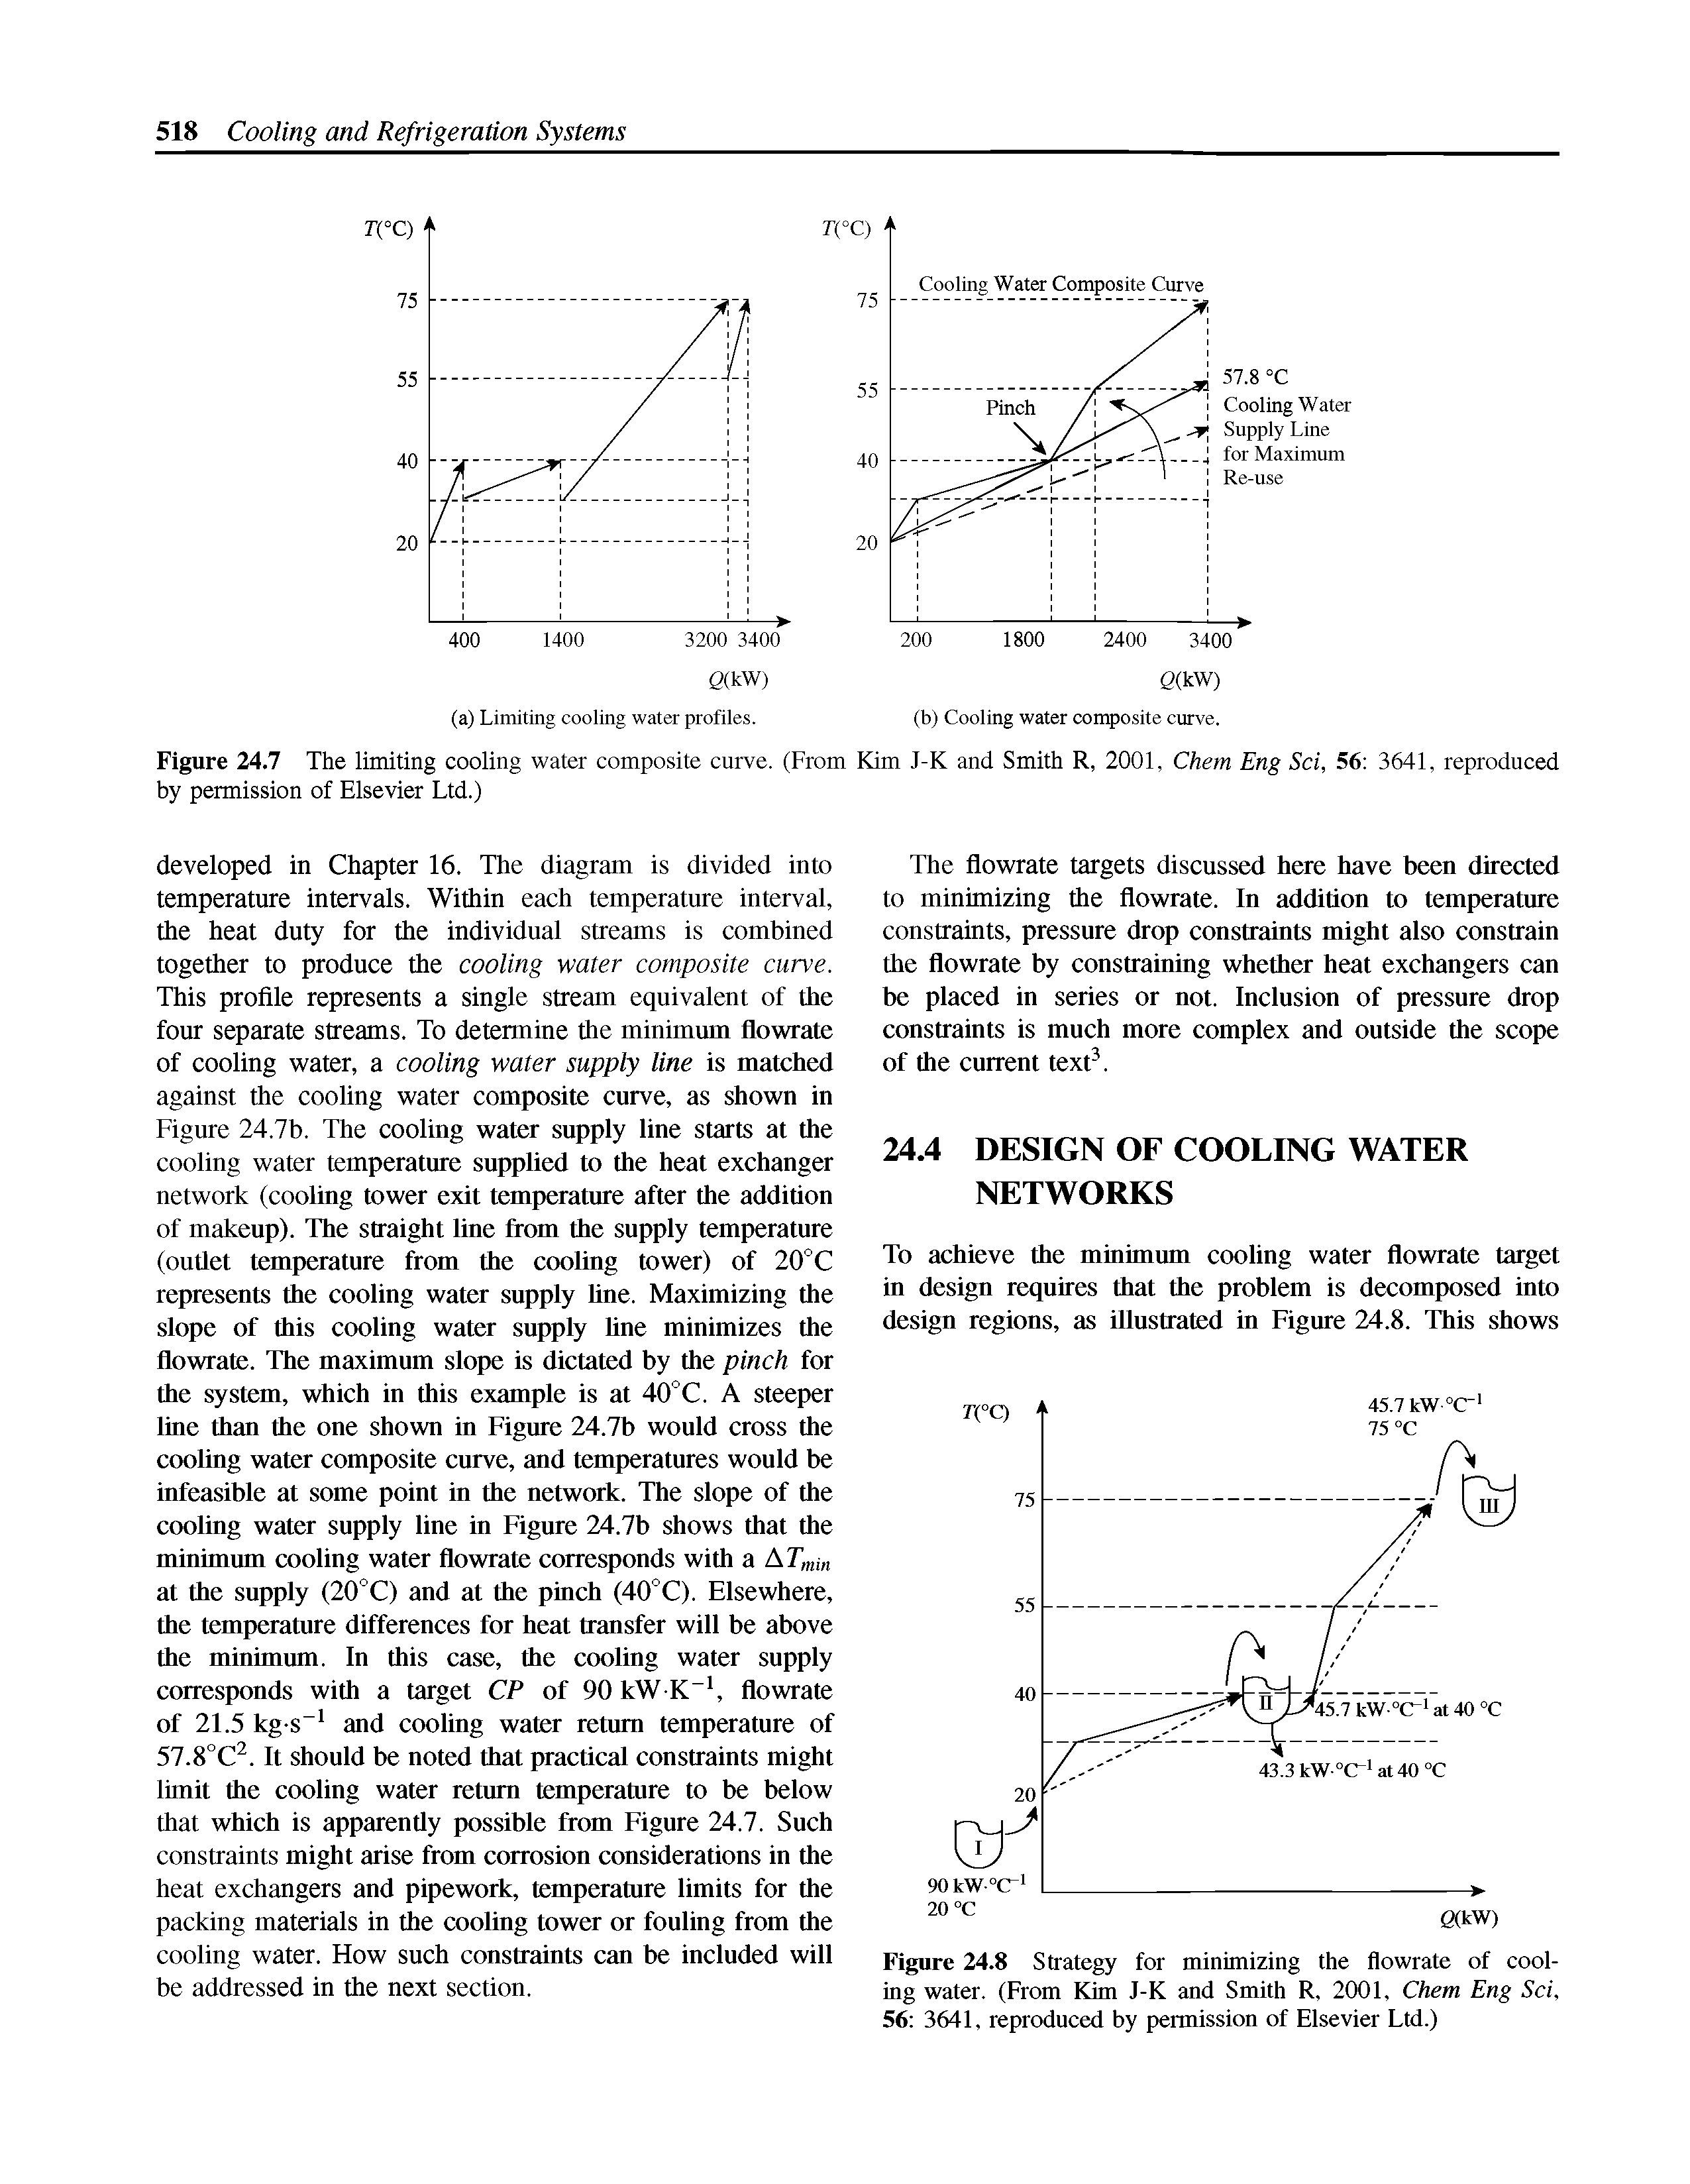 Figure 24.7 The limiting cooling water composite curve. (From Kim J-K and Smith R, 2001, Chern Eng Sci, 56 3641, reproduced by permission of Elsevier Ltd.)...